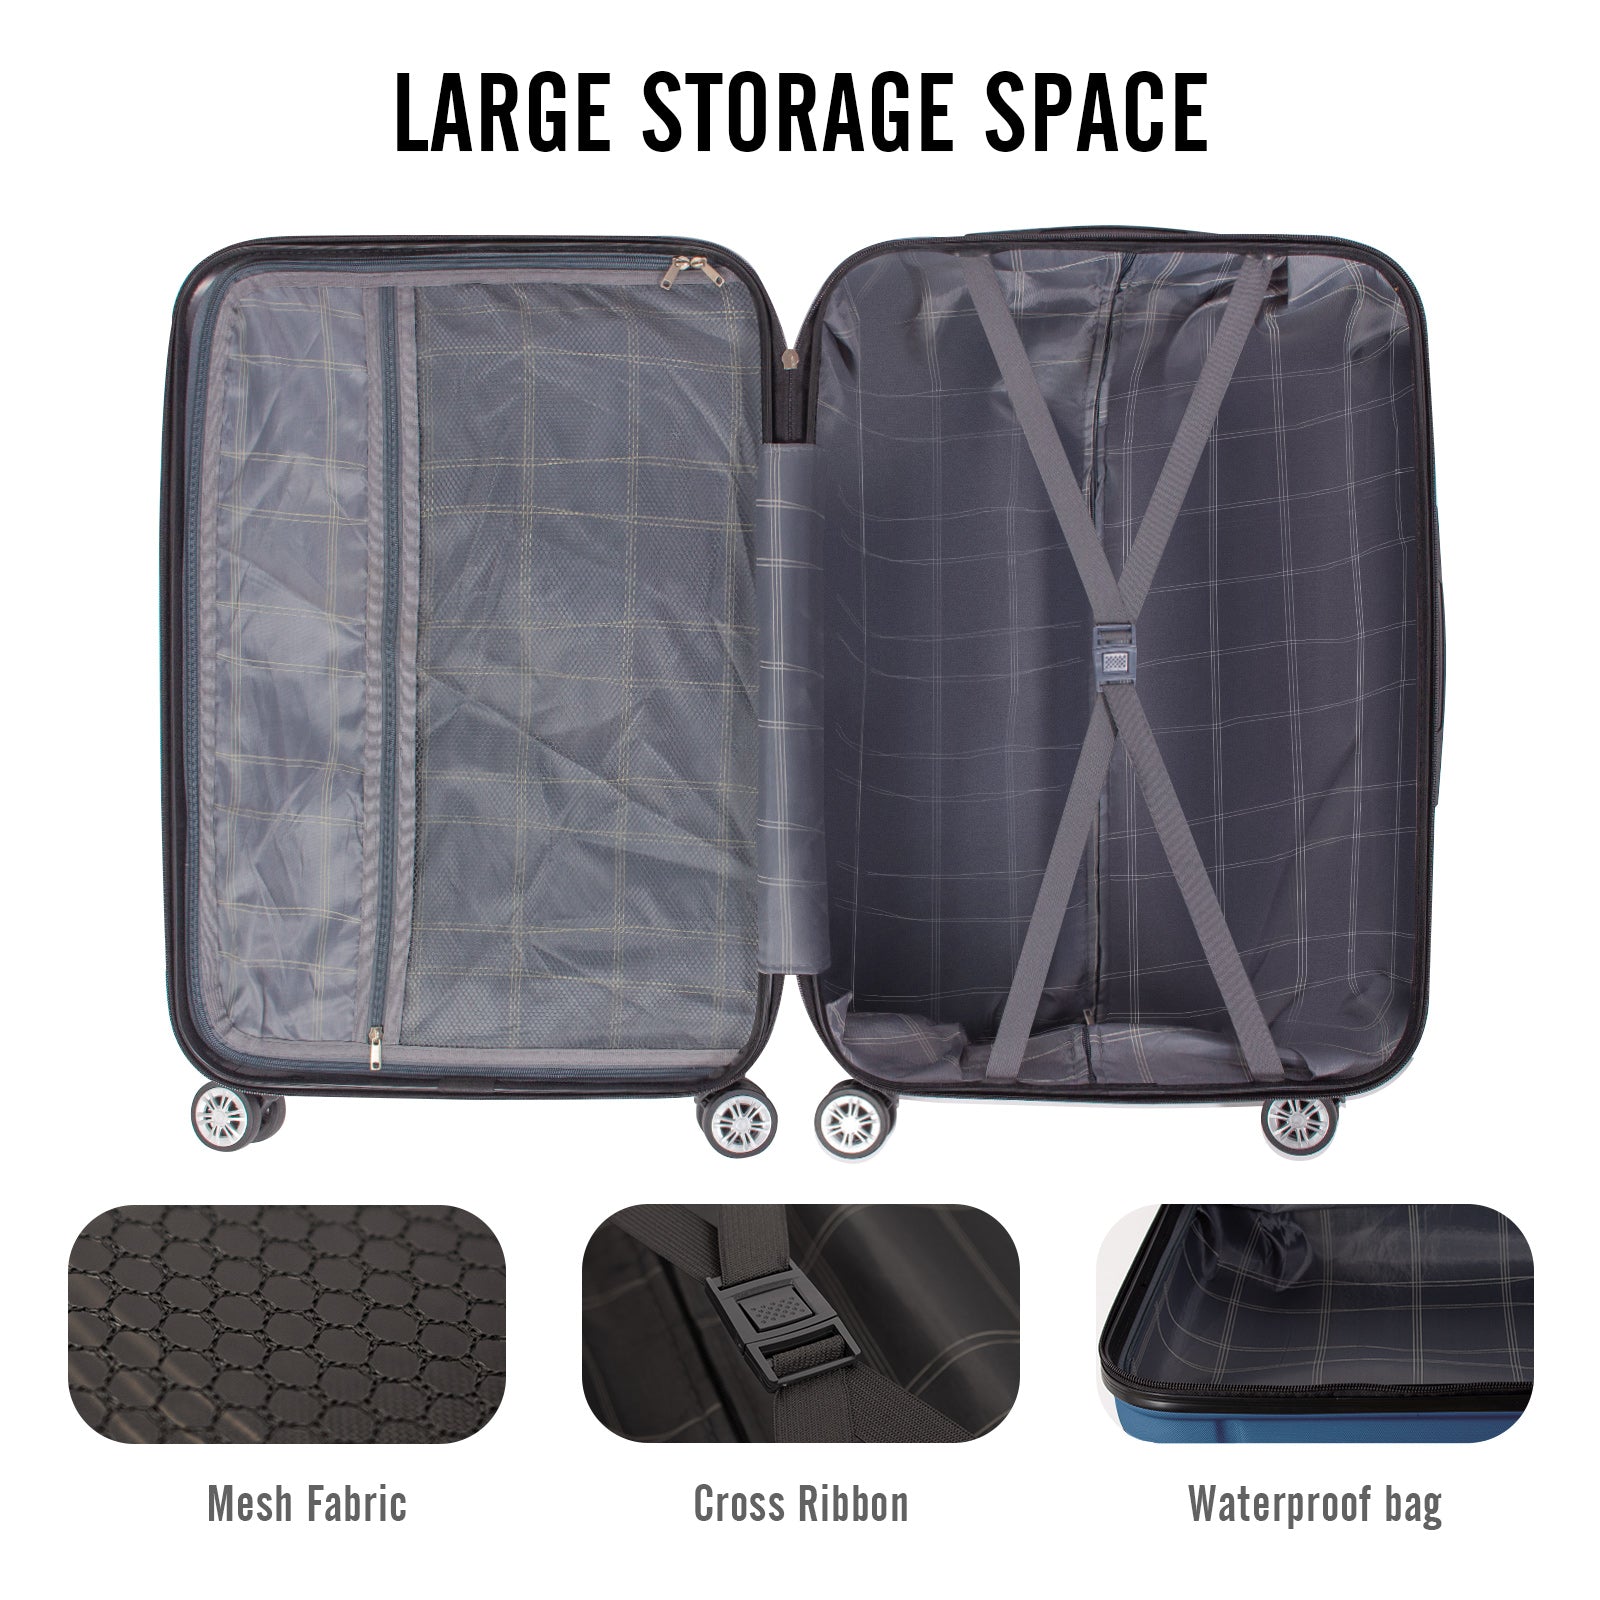 Todeco-Medium-Suitcase-68cm-Travel-Suitcase-Rigid-and-Lightweight-ABS-Travel-Suitcase-with-Wheels-Suitcases-4-Double-Wheels-68x45x26cm-Champagne